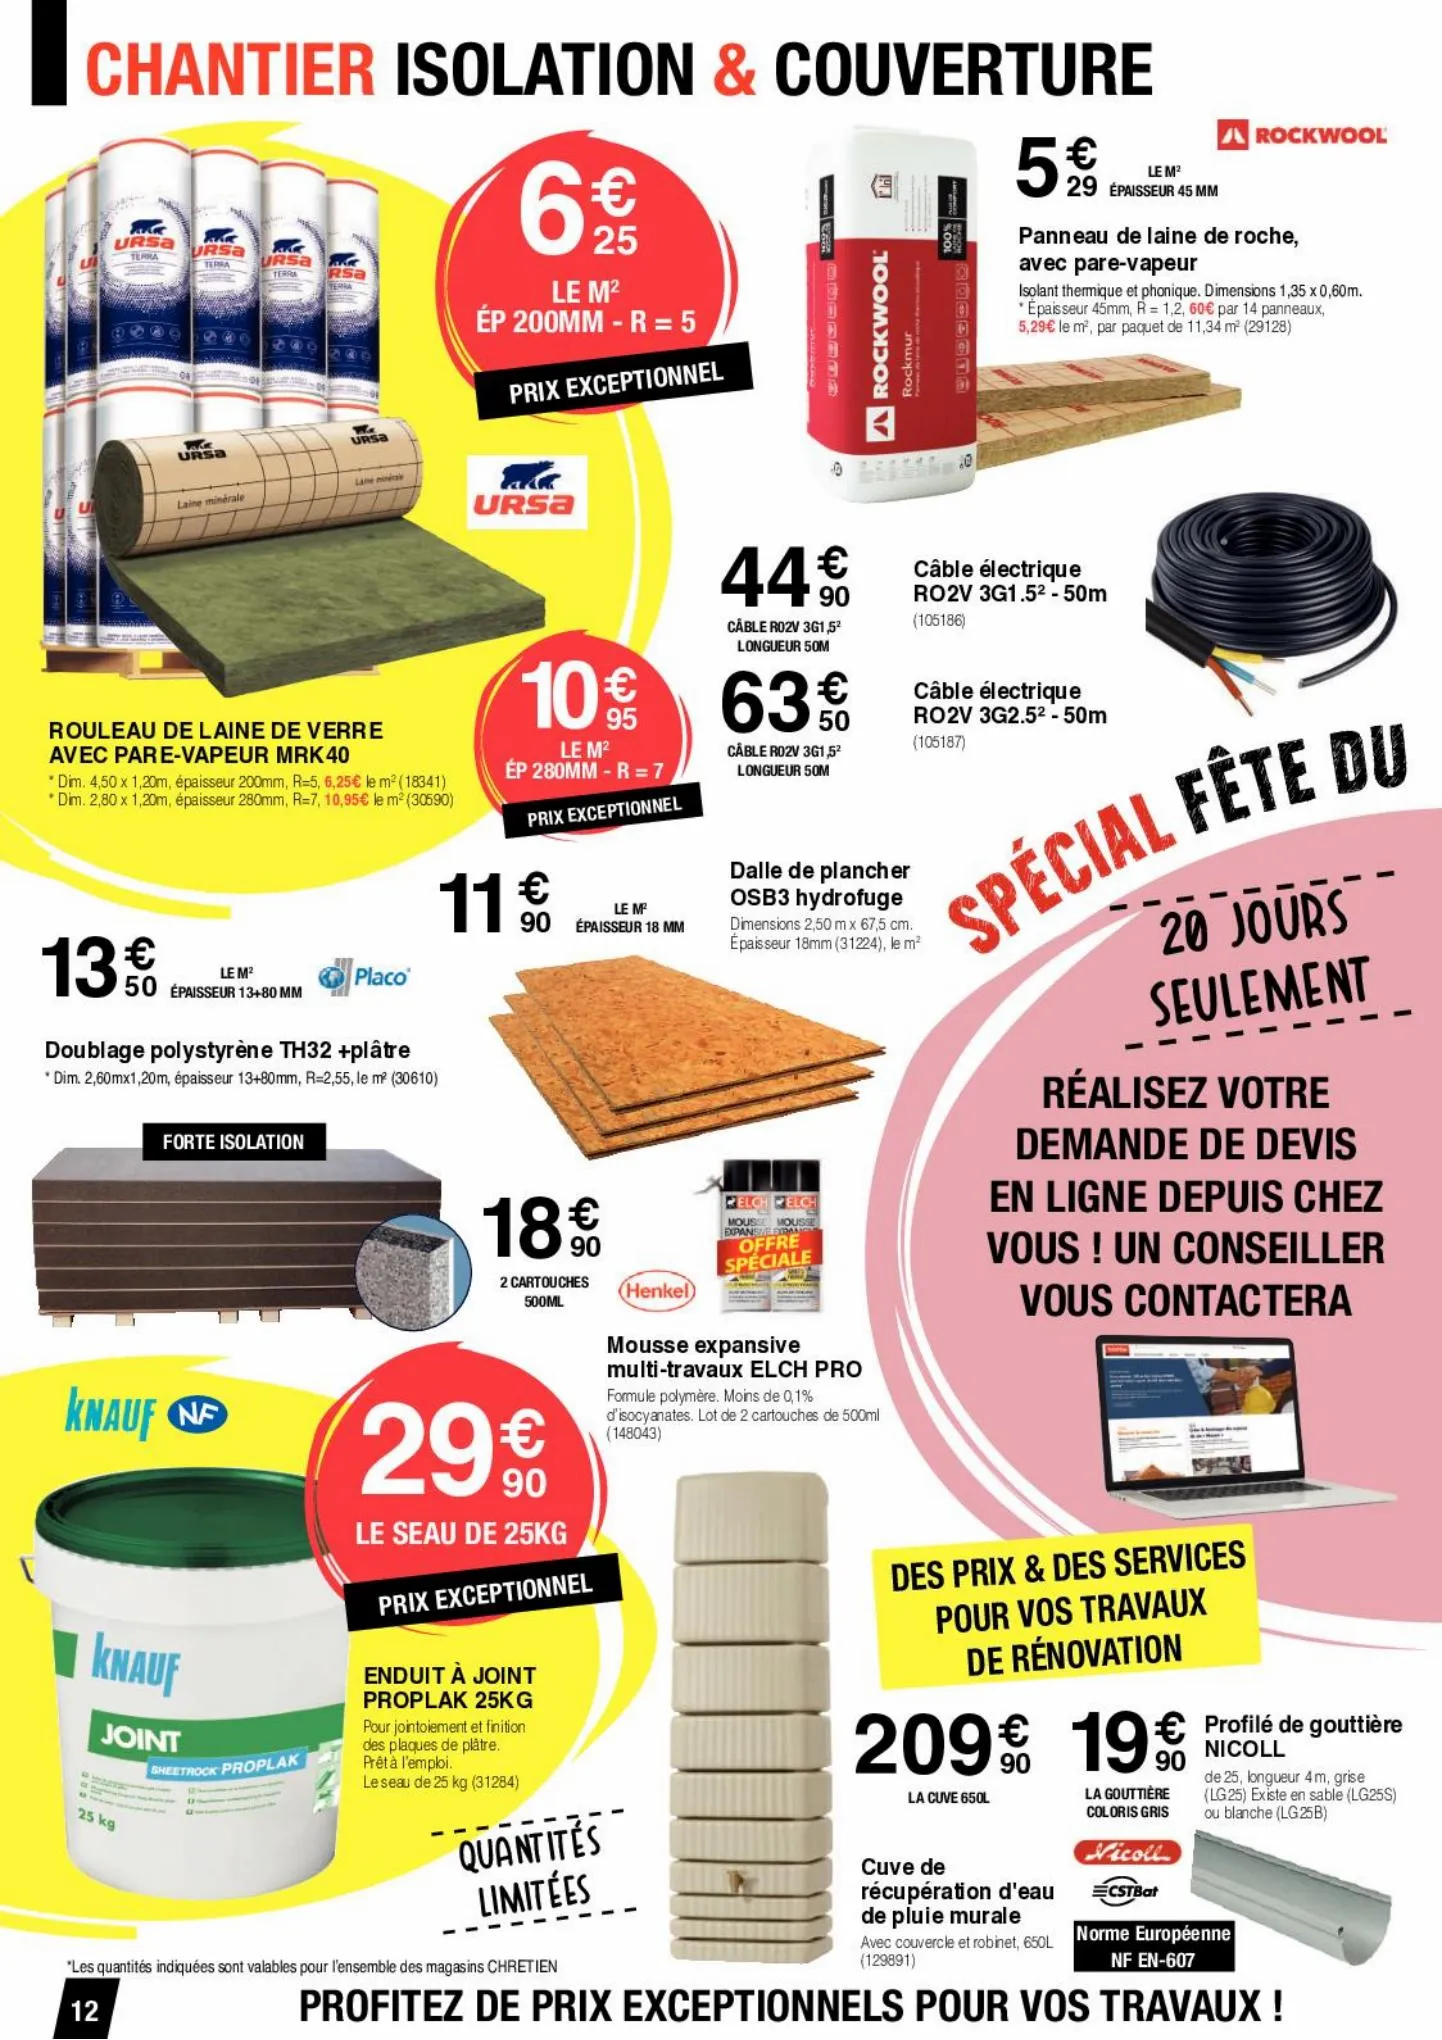 Catalogue Promo Avril 2023 Chretien, page 00012